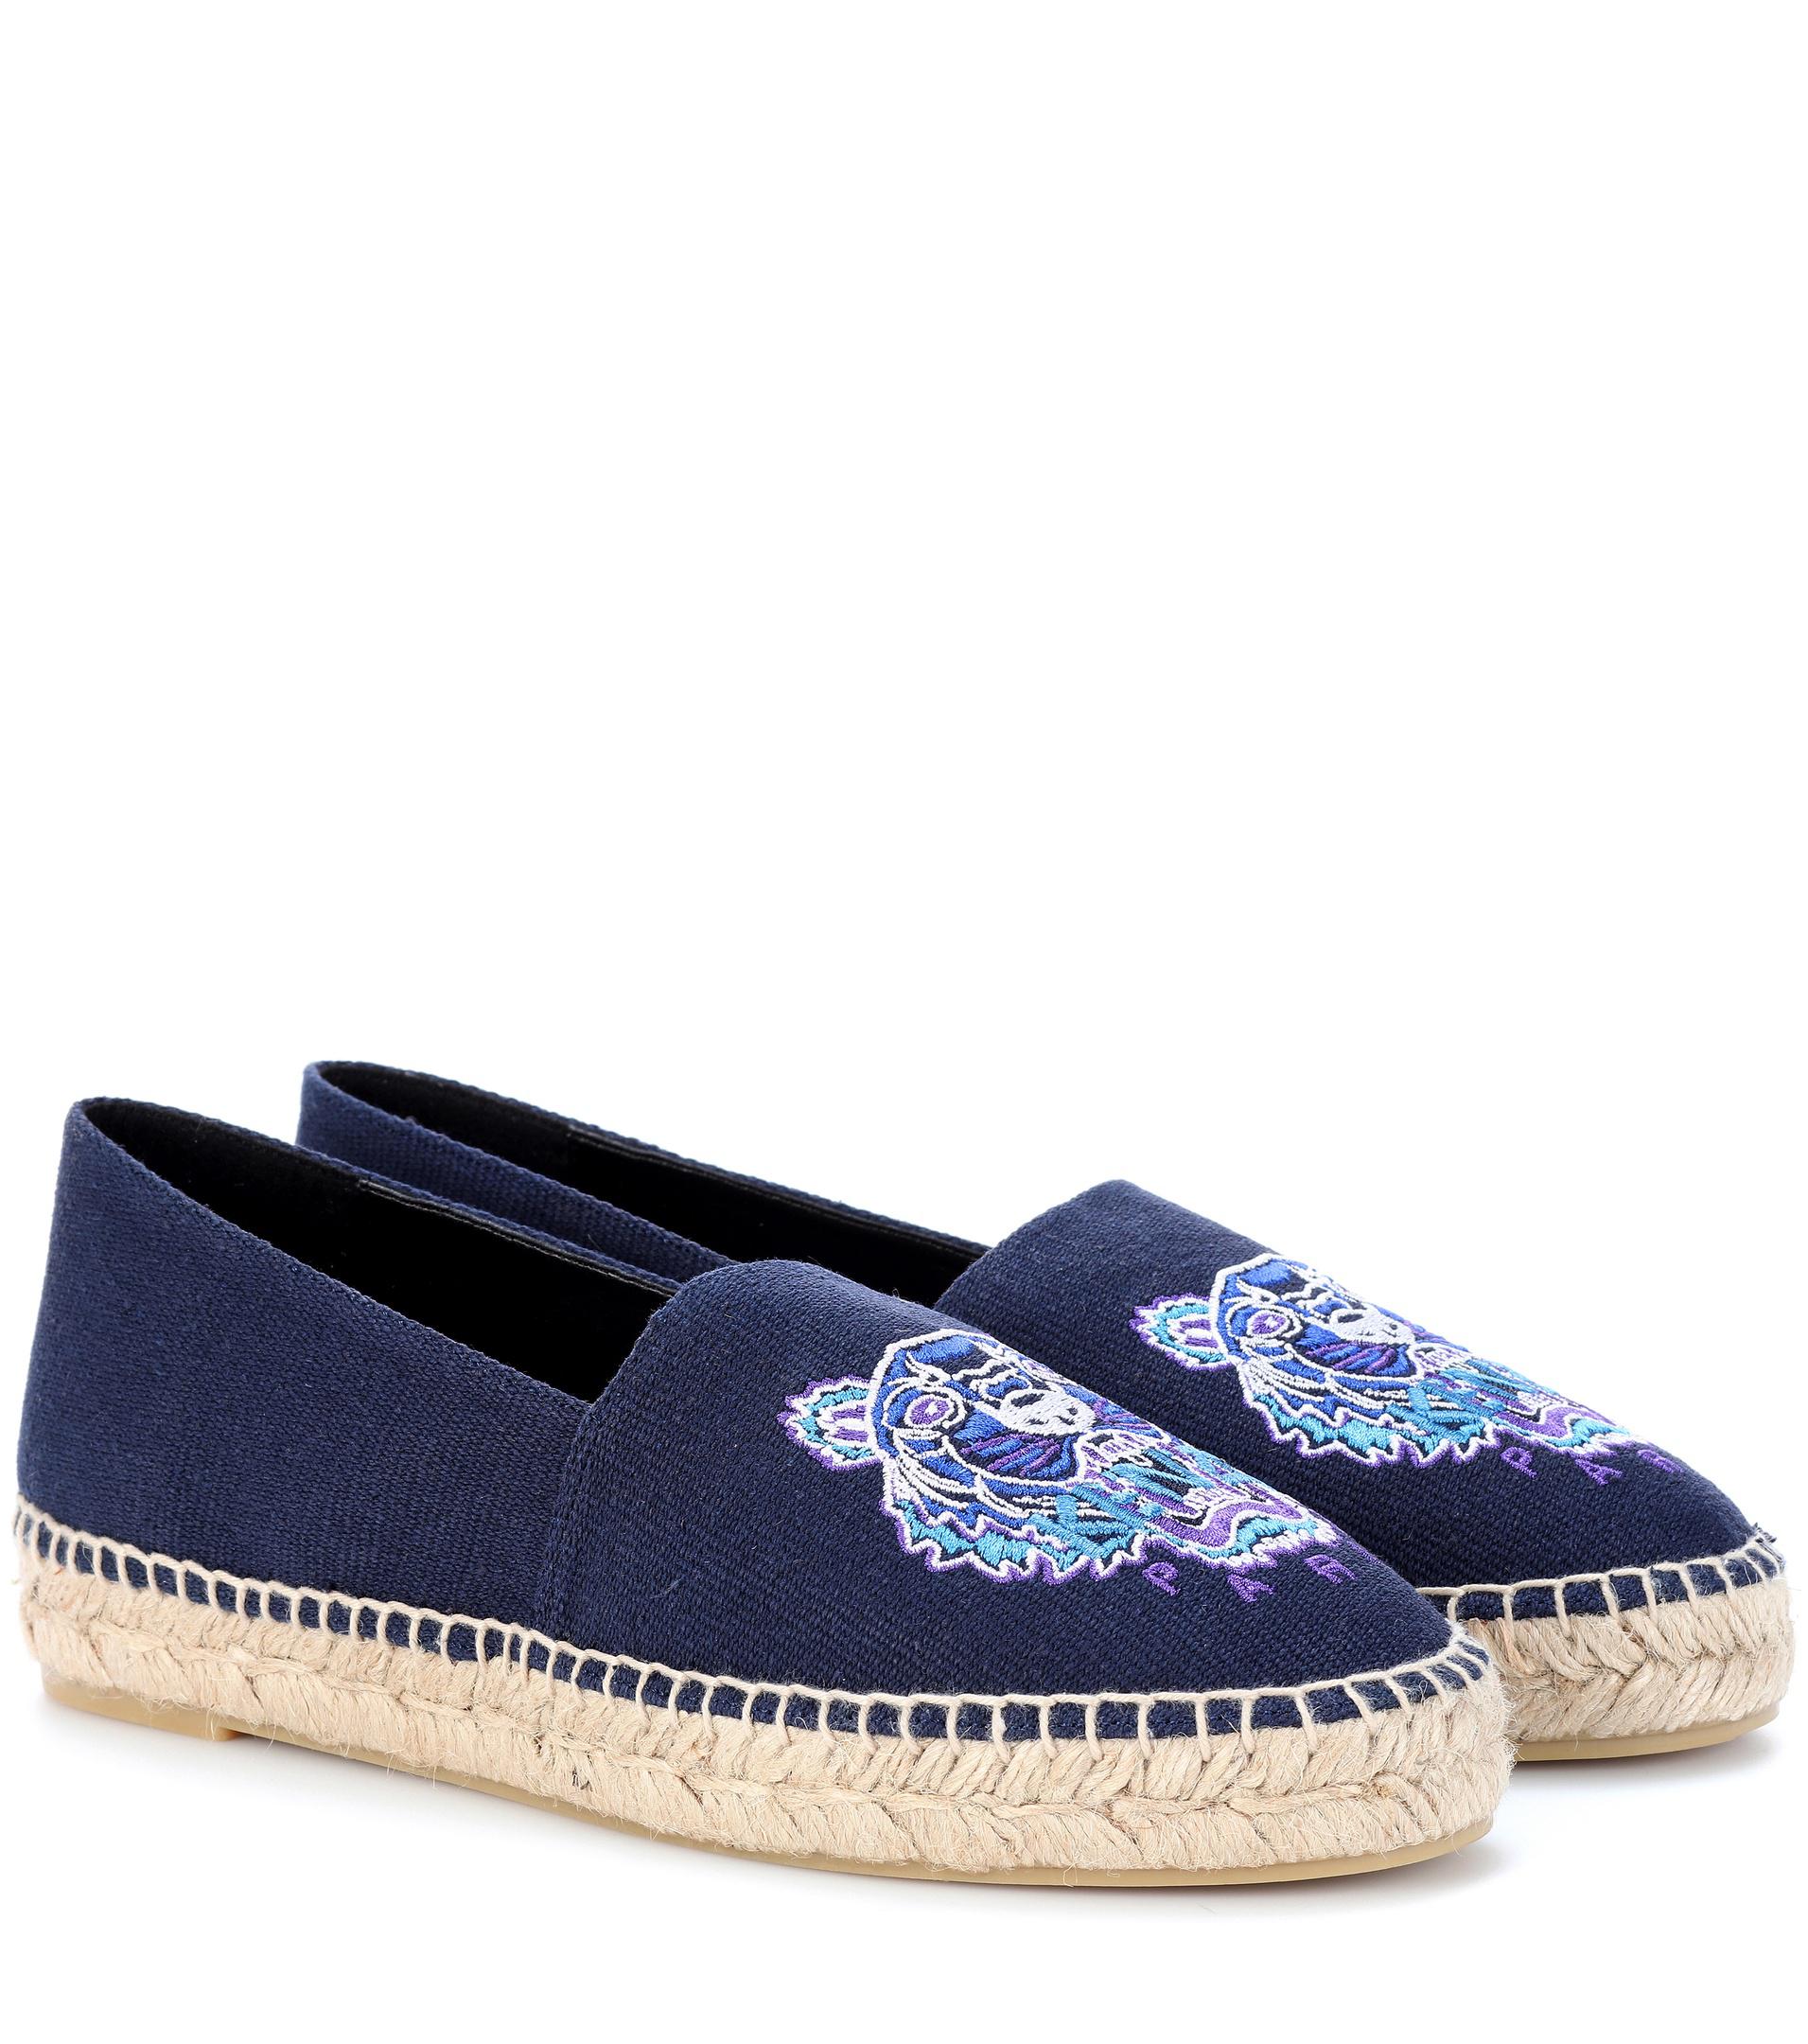 Lyst - Kenzo Embroidered Espadrilles in Blue